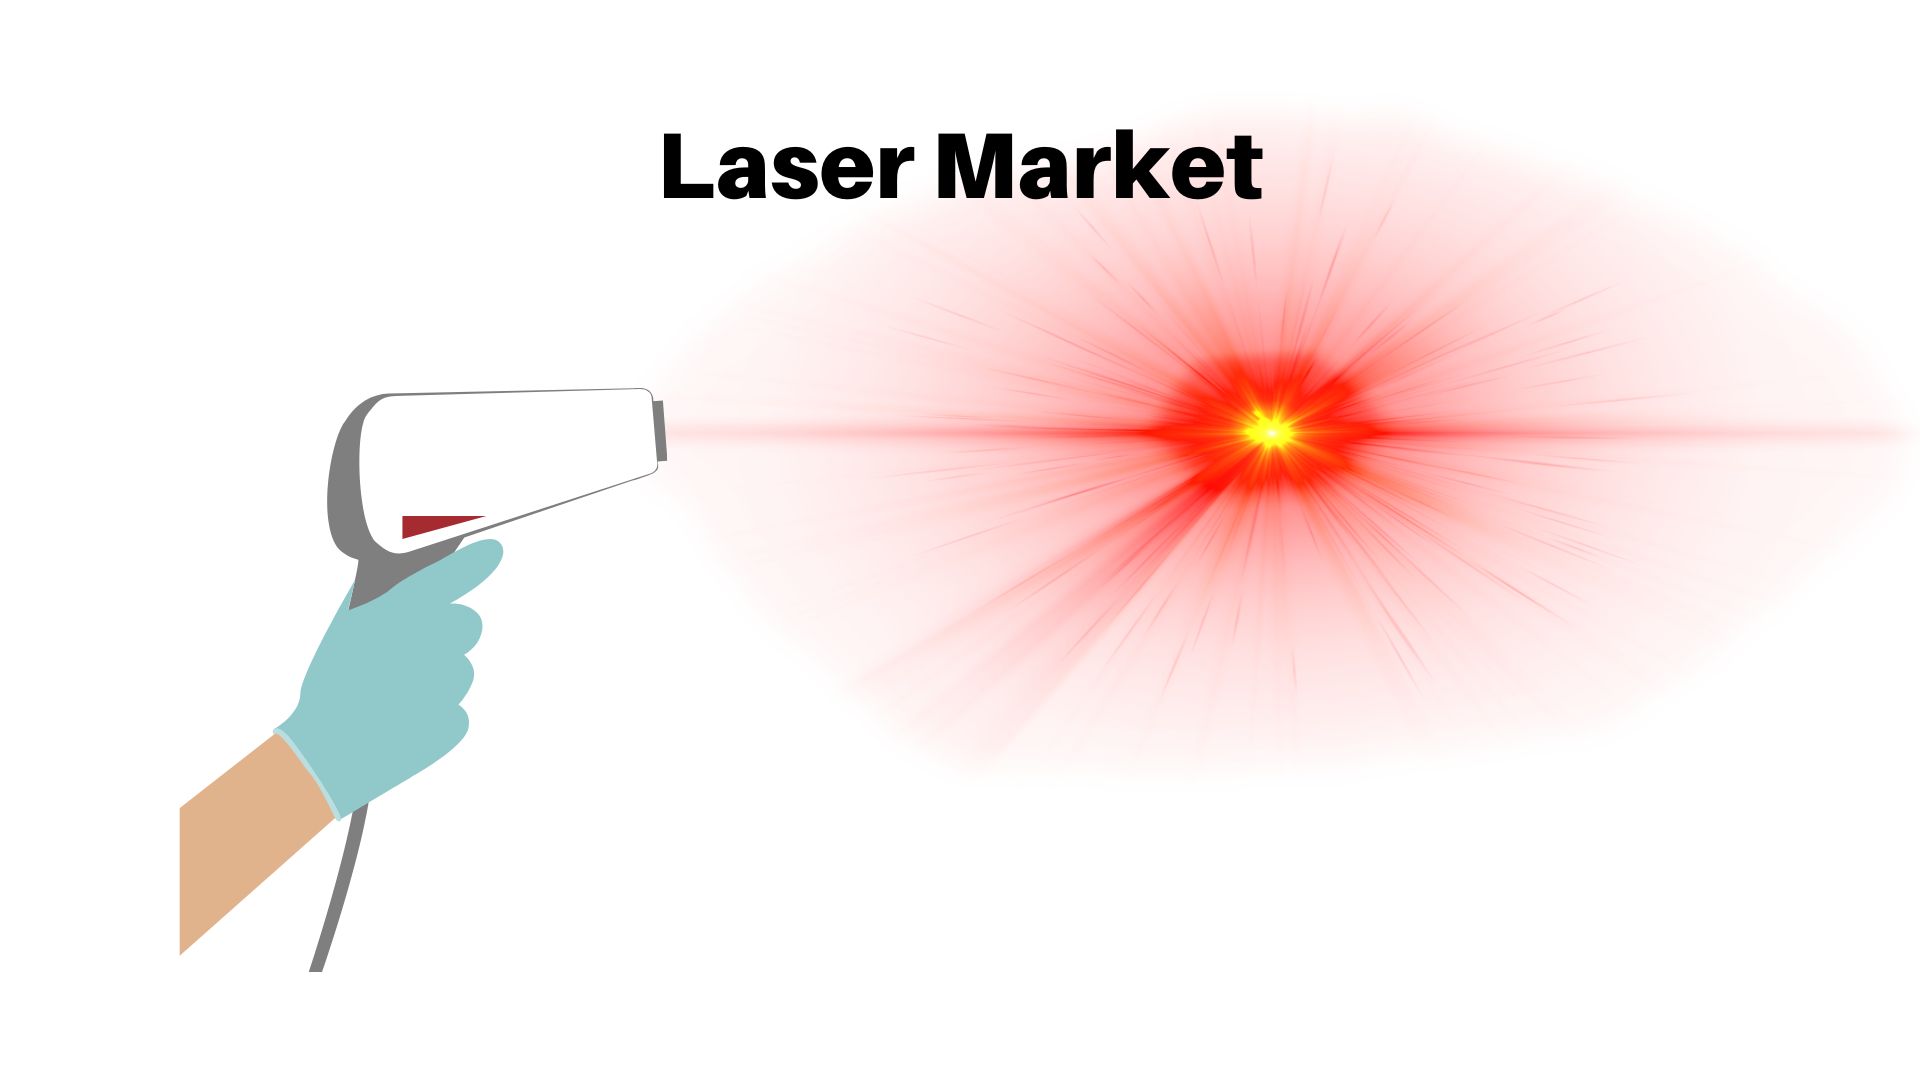 Laser Market to Reach USD 14.0 Billion by 2032, Says Market.us Research Study